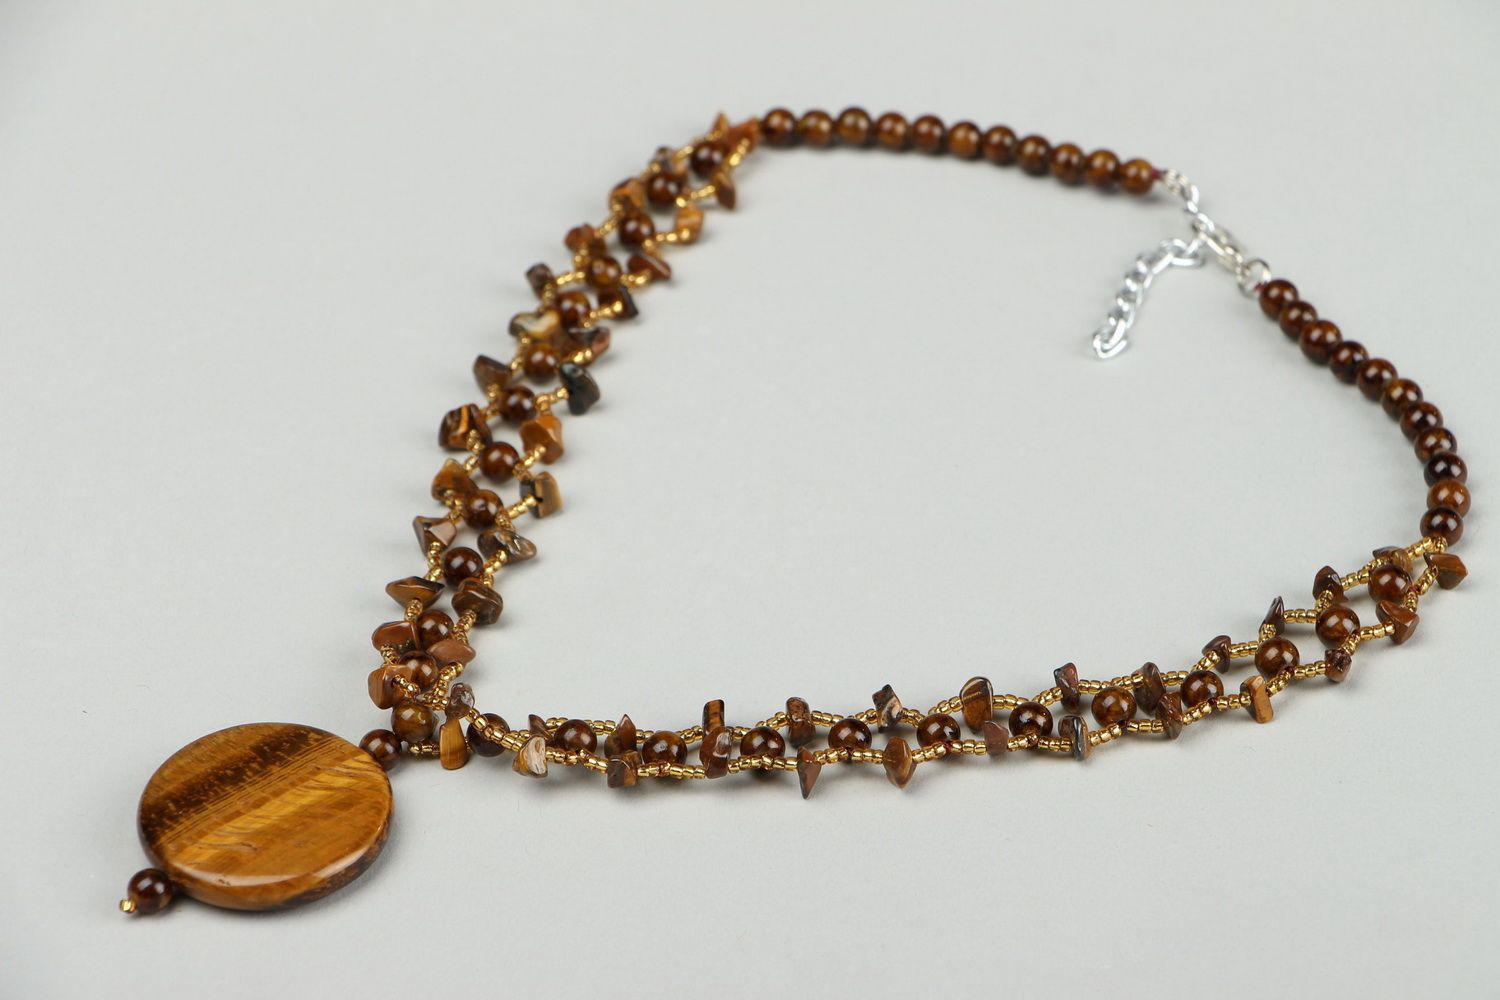 Necklace made of beads and tiger's eye stone photo 1